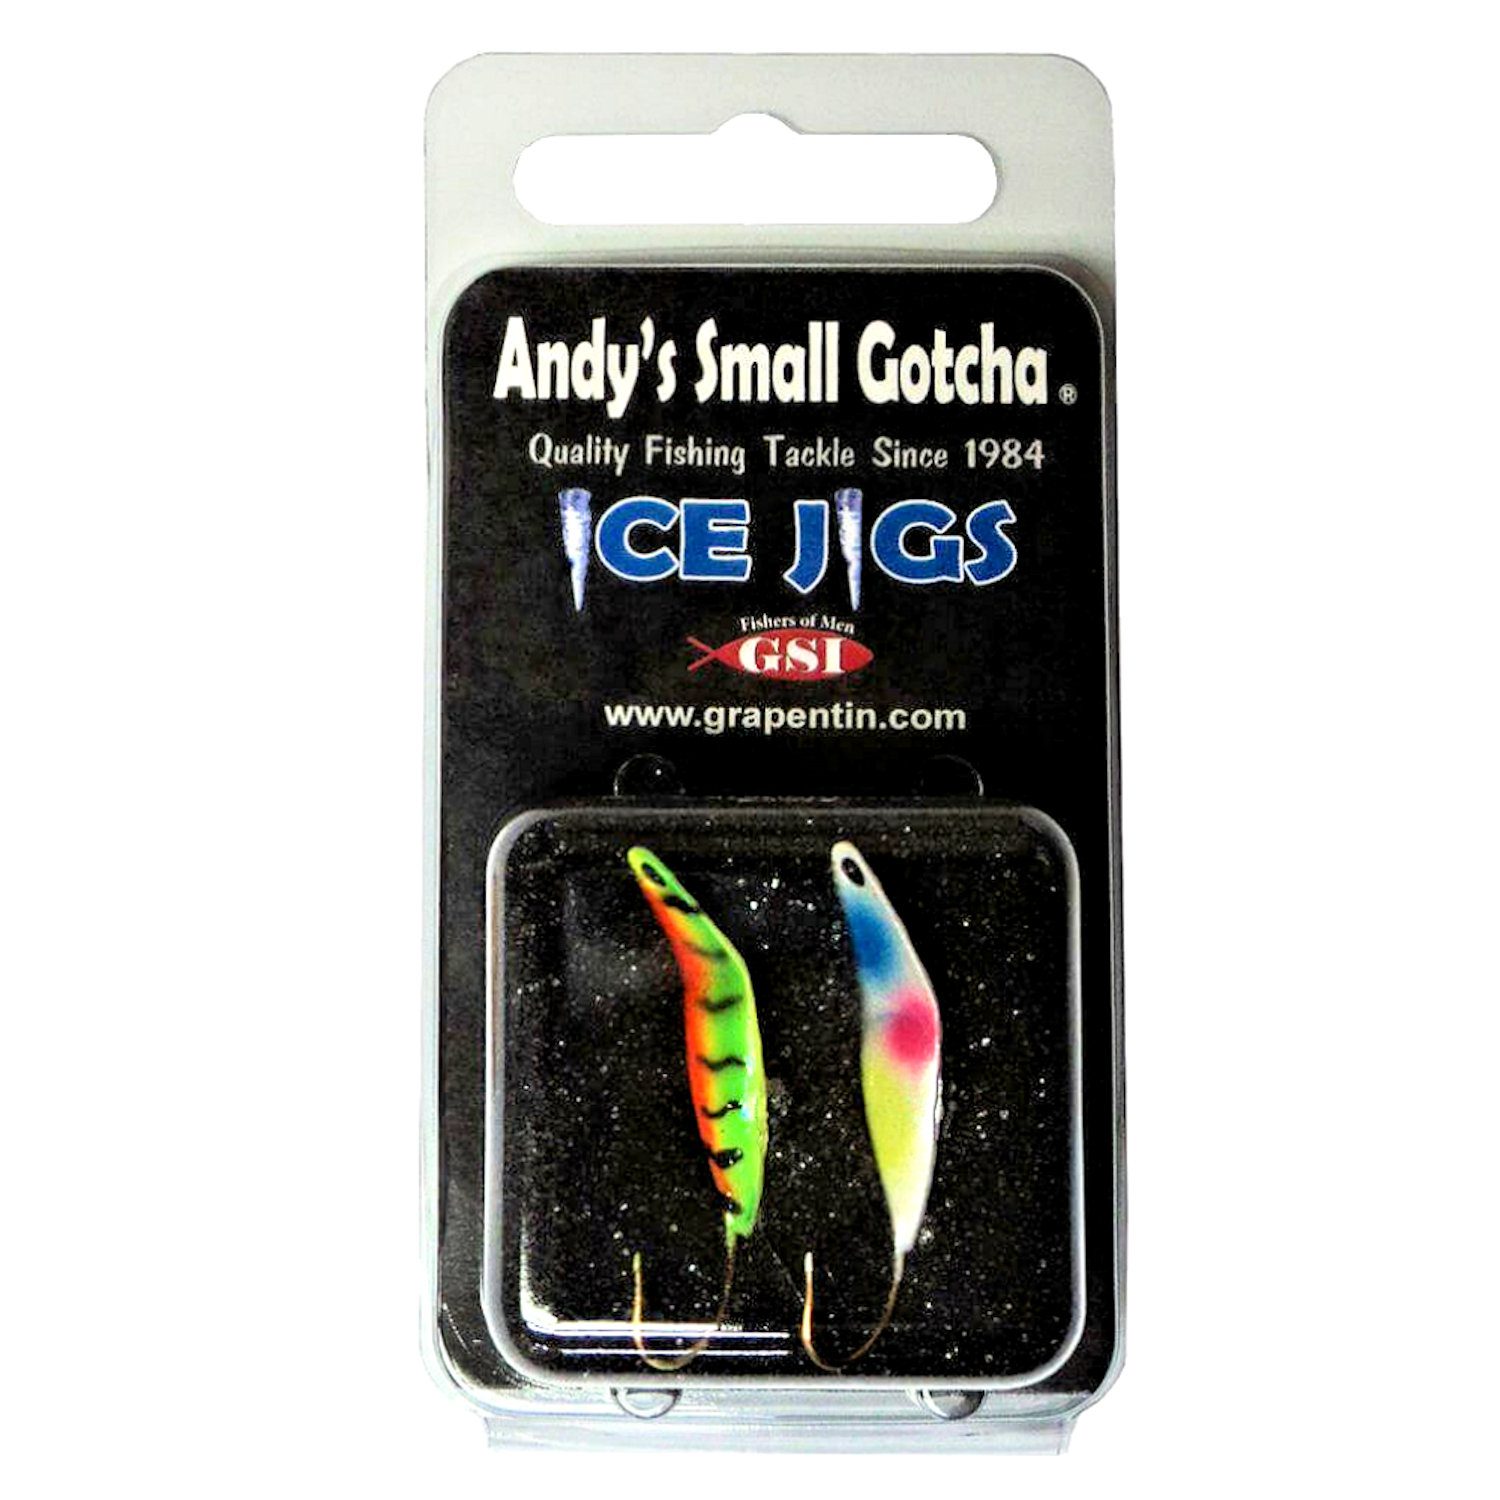 Andy's Small Gotcha Jig Clam Pack – Grapentin Specialties, Inc.